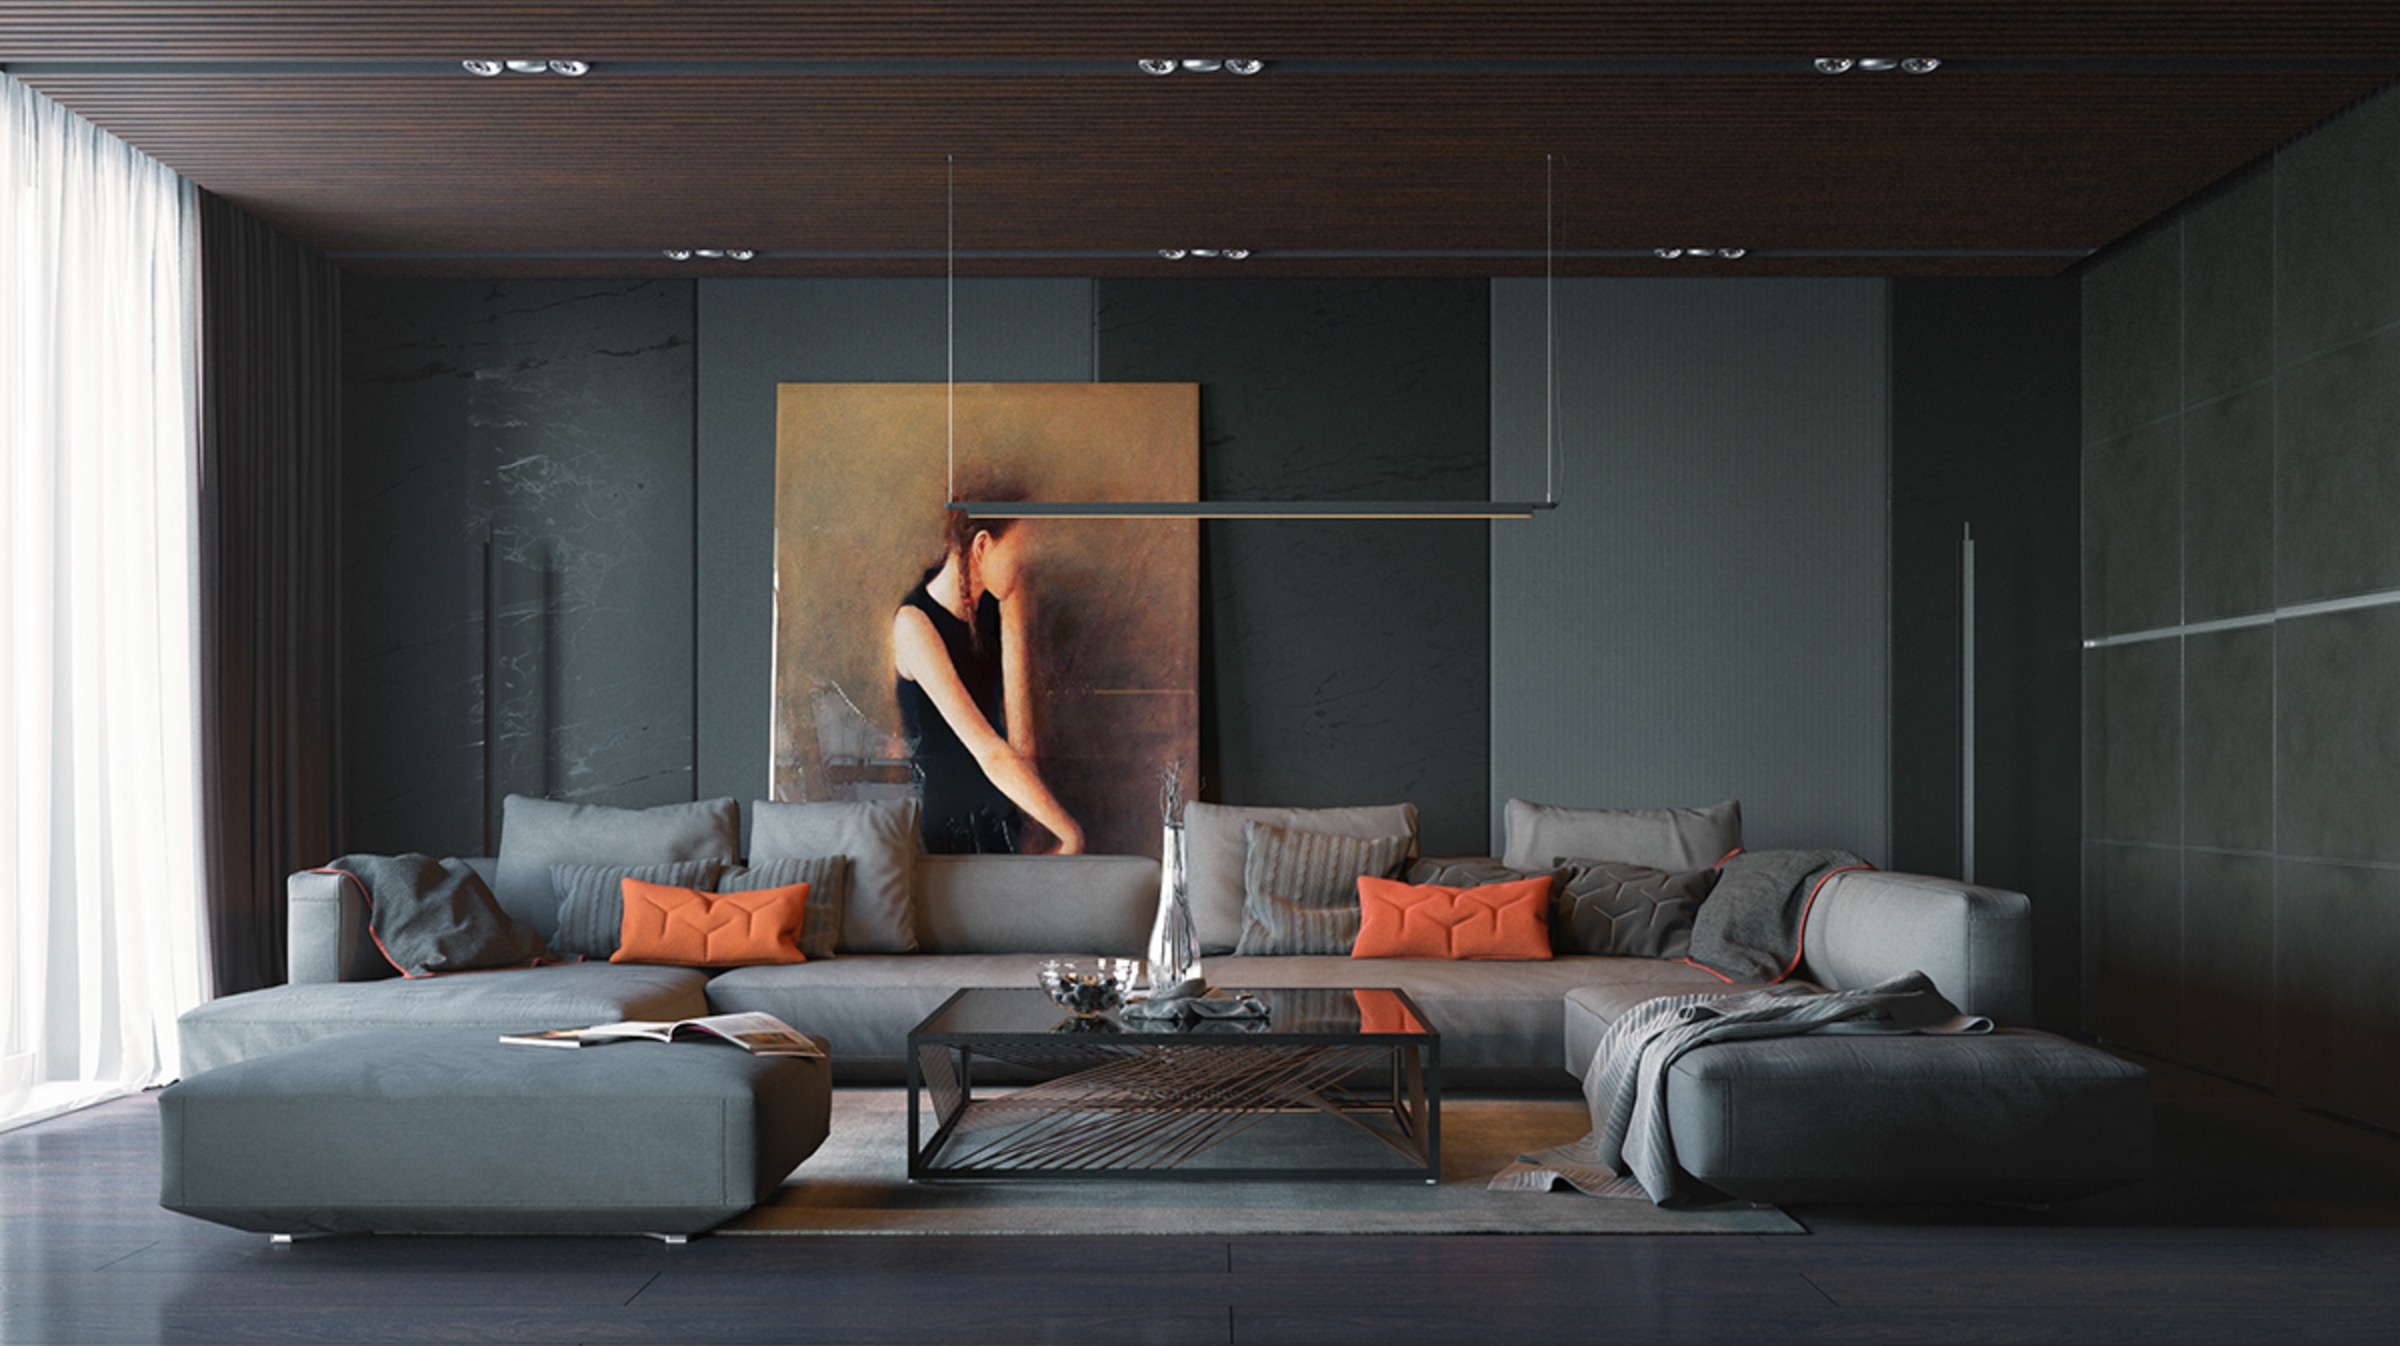 interior ideas using substantial artwork within a stylish interior design ... IIZJQKY